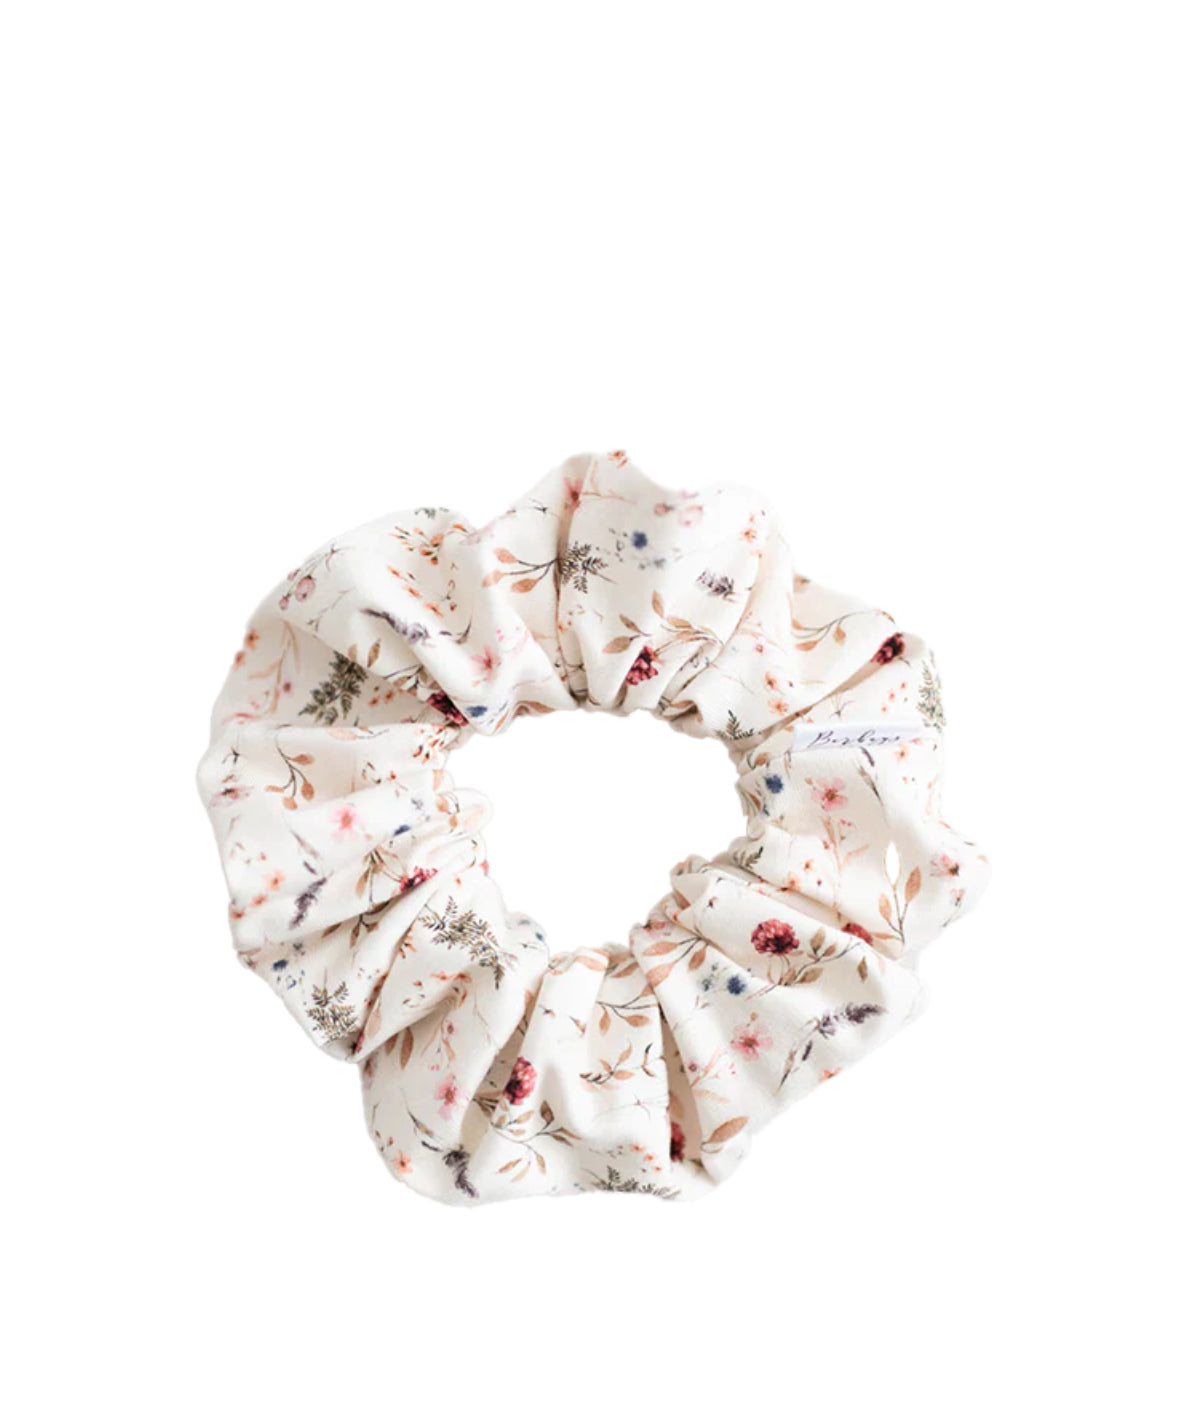 Barbays Scrunchie in Flowerscapes